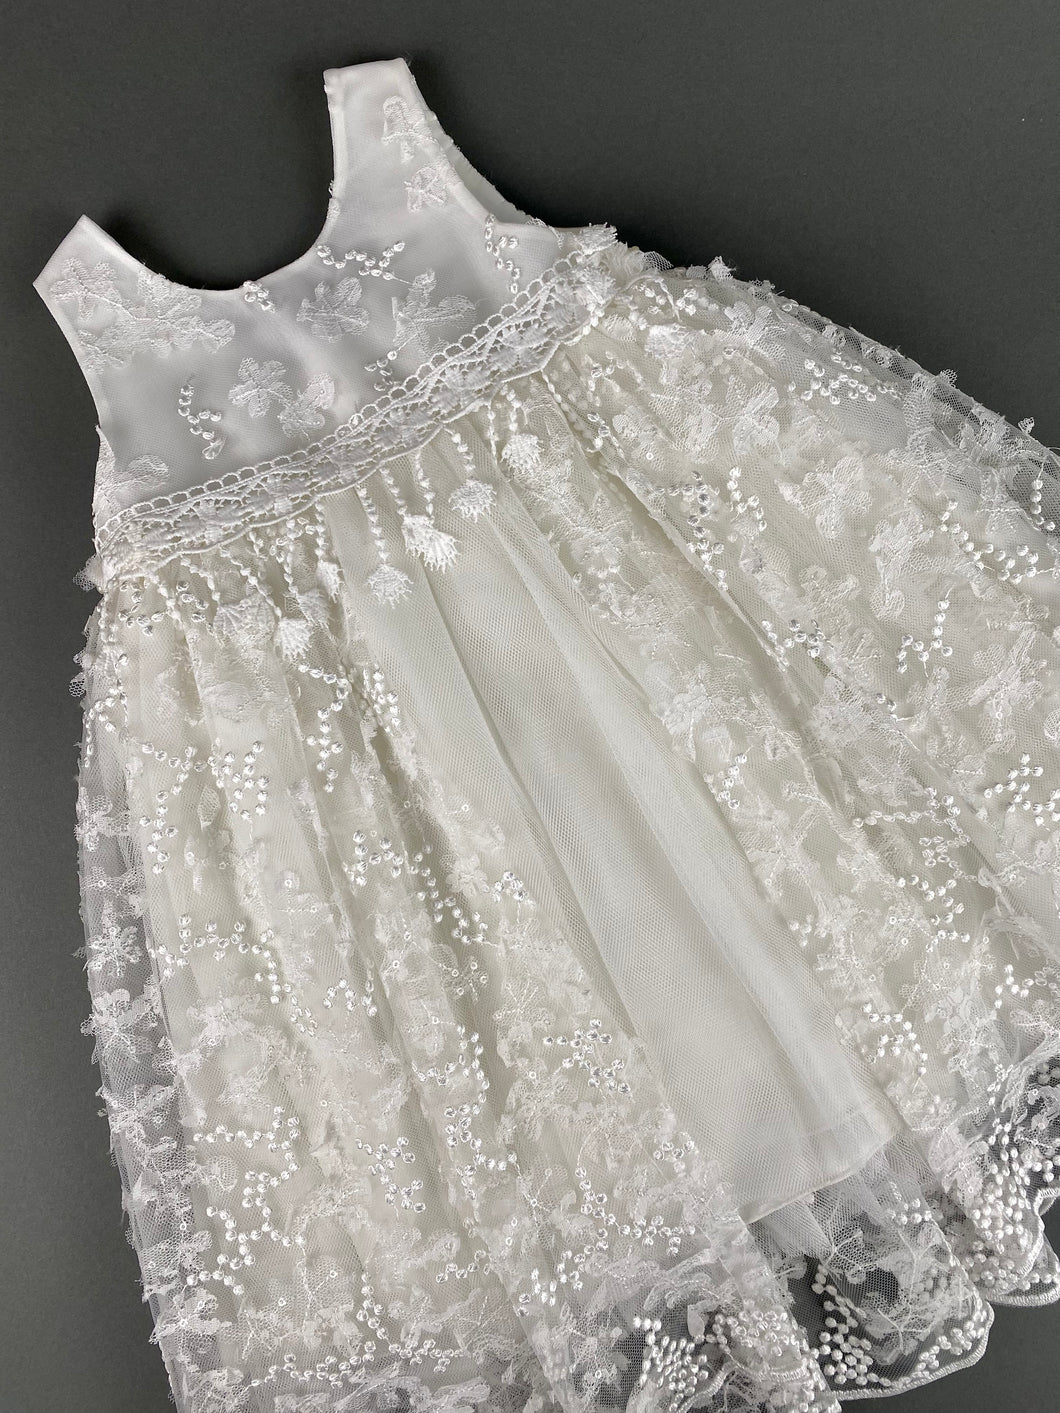 Dress 71 Girls Baptismal Christening Glitter French Lace Dress with Tail, matching Bolero and Hat. Made in Greece exclusively for Rosies Collections